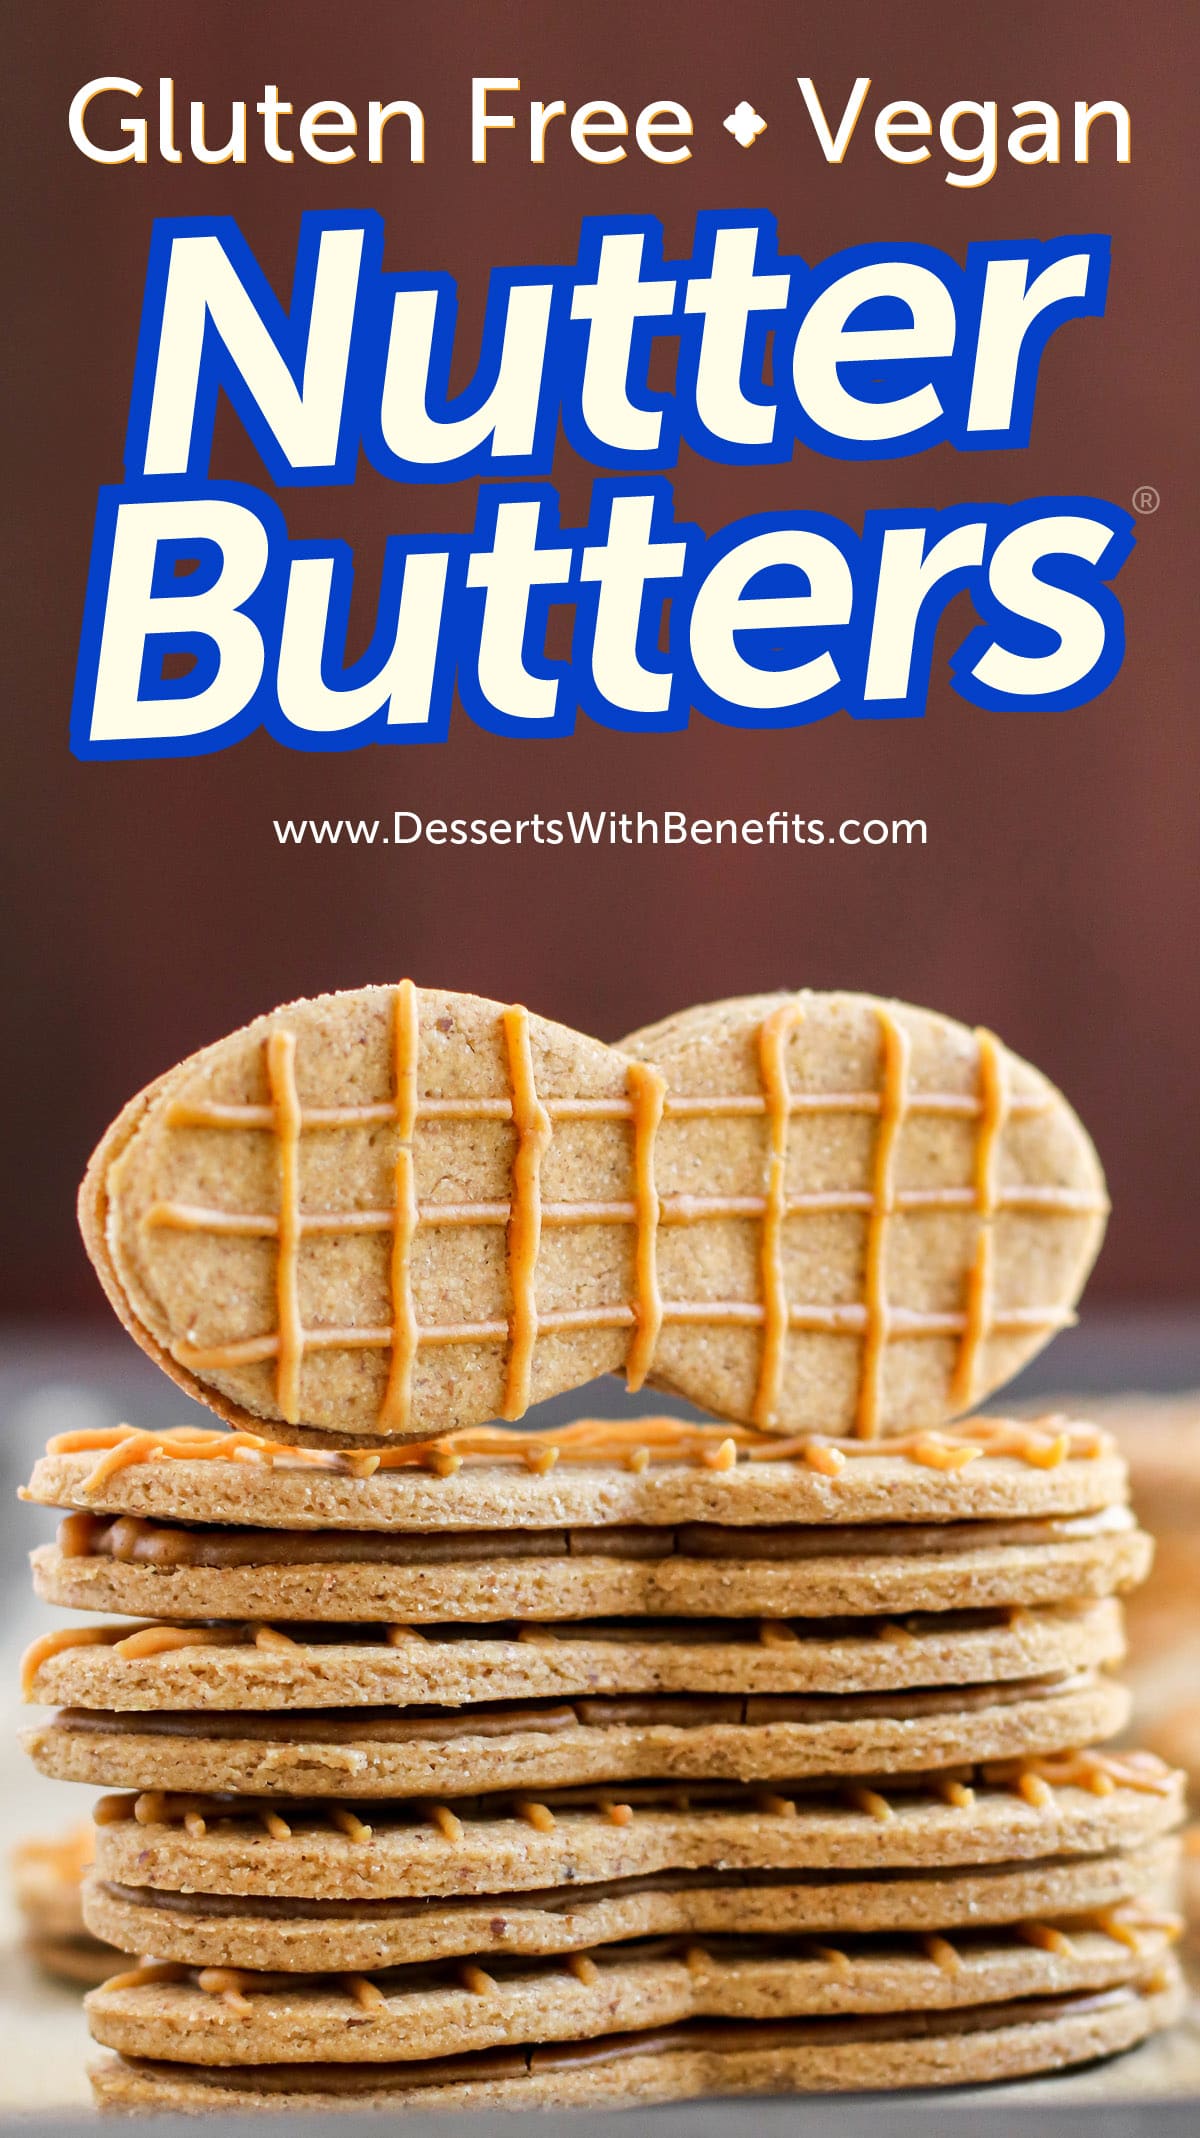 Just as delicious as the storebought kinds but made without the corn syrup and trans fats, these 80-calorie healthy Homemade Nutter Butters will blow your mind! This DIY recipe is sugar free, high protein, gluten free, dairy free, and vegan too -- made with natural peanut butter, oats, and all natural stevia extract.